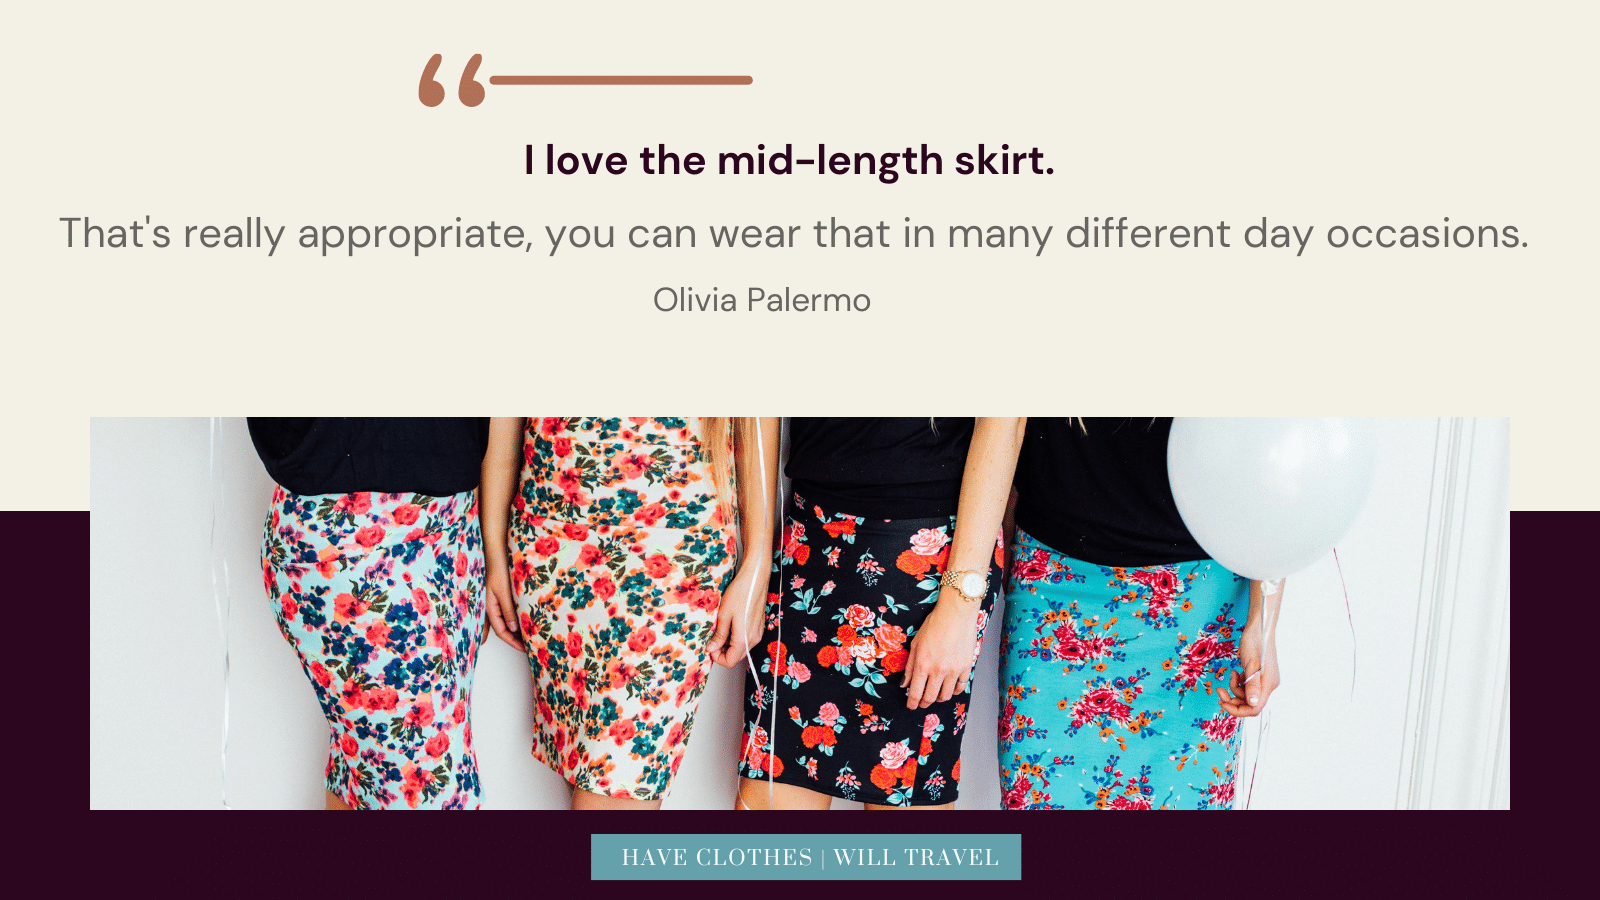 14. I love the mid-length skirt. That's really appropriate, you can wear that in many different day occasions. — Olivia Palermo